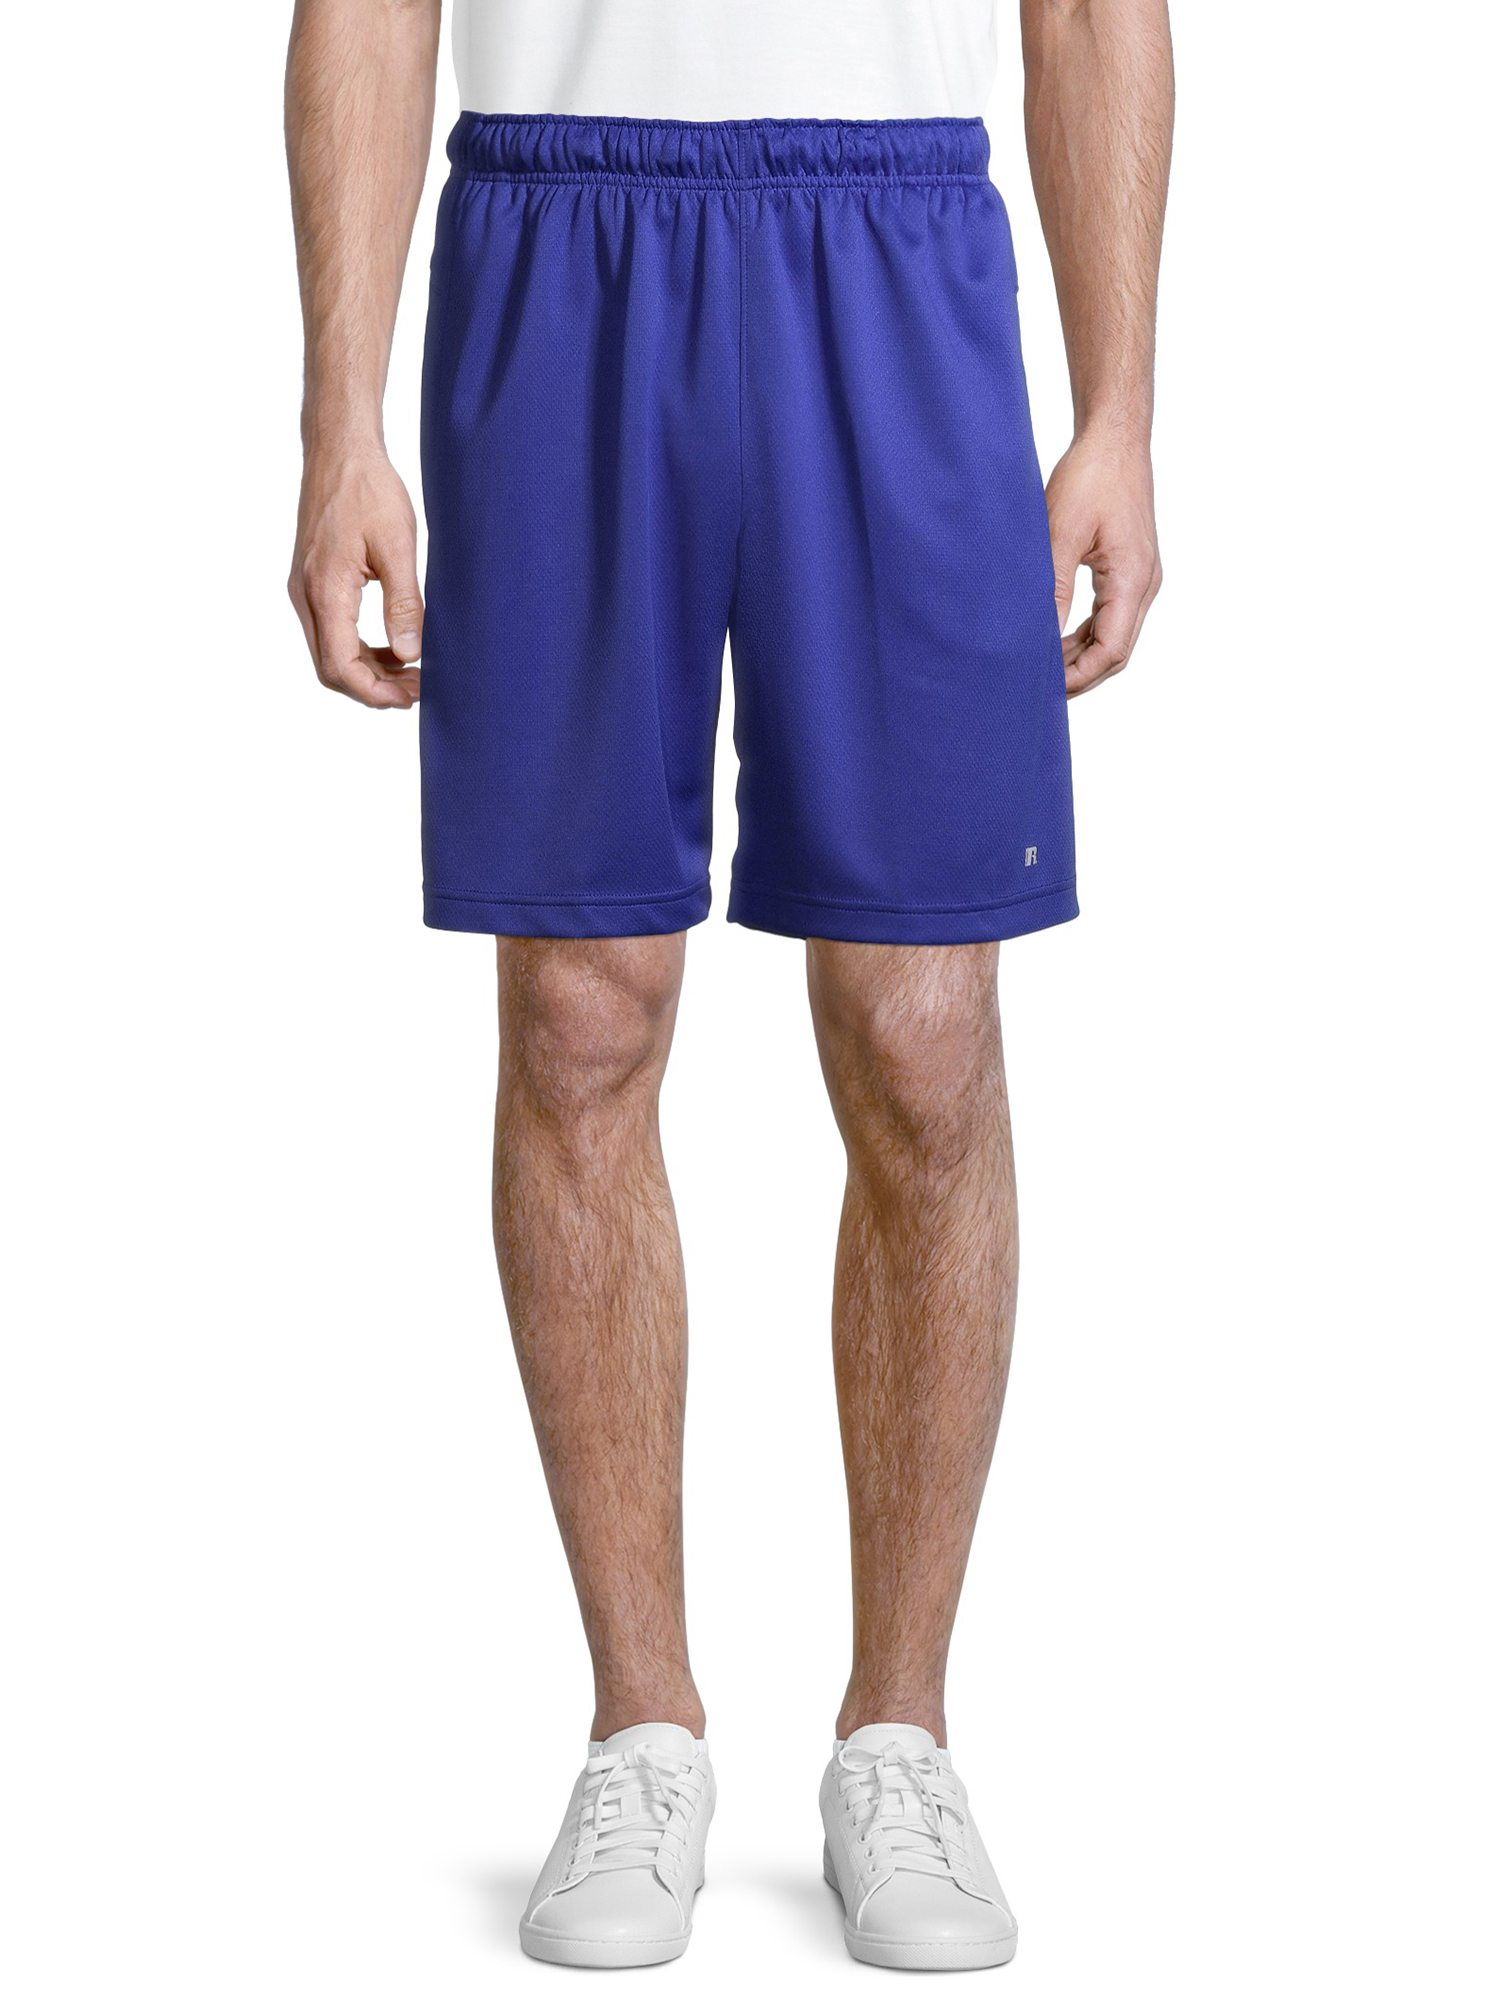 Russell Men's and Big Men's 9" Core Training Active Shorts, up to Size 5xl - image 1 of 6